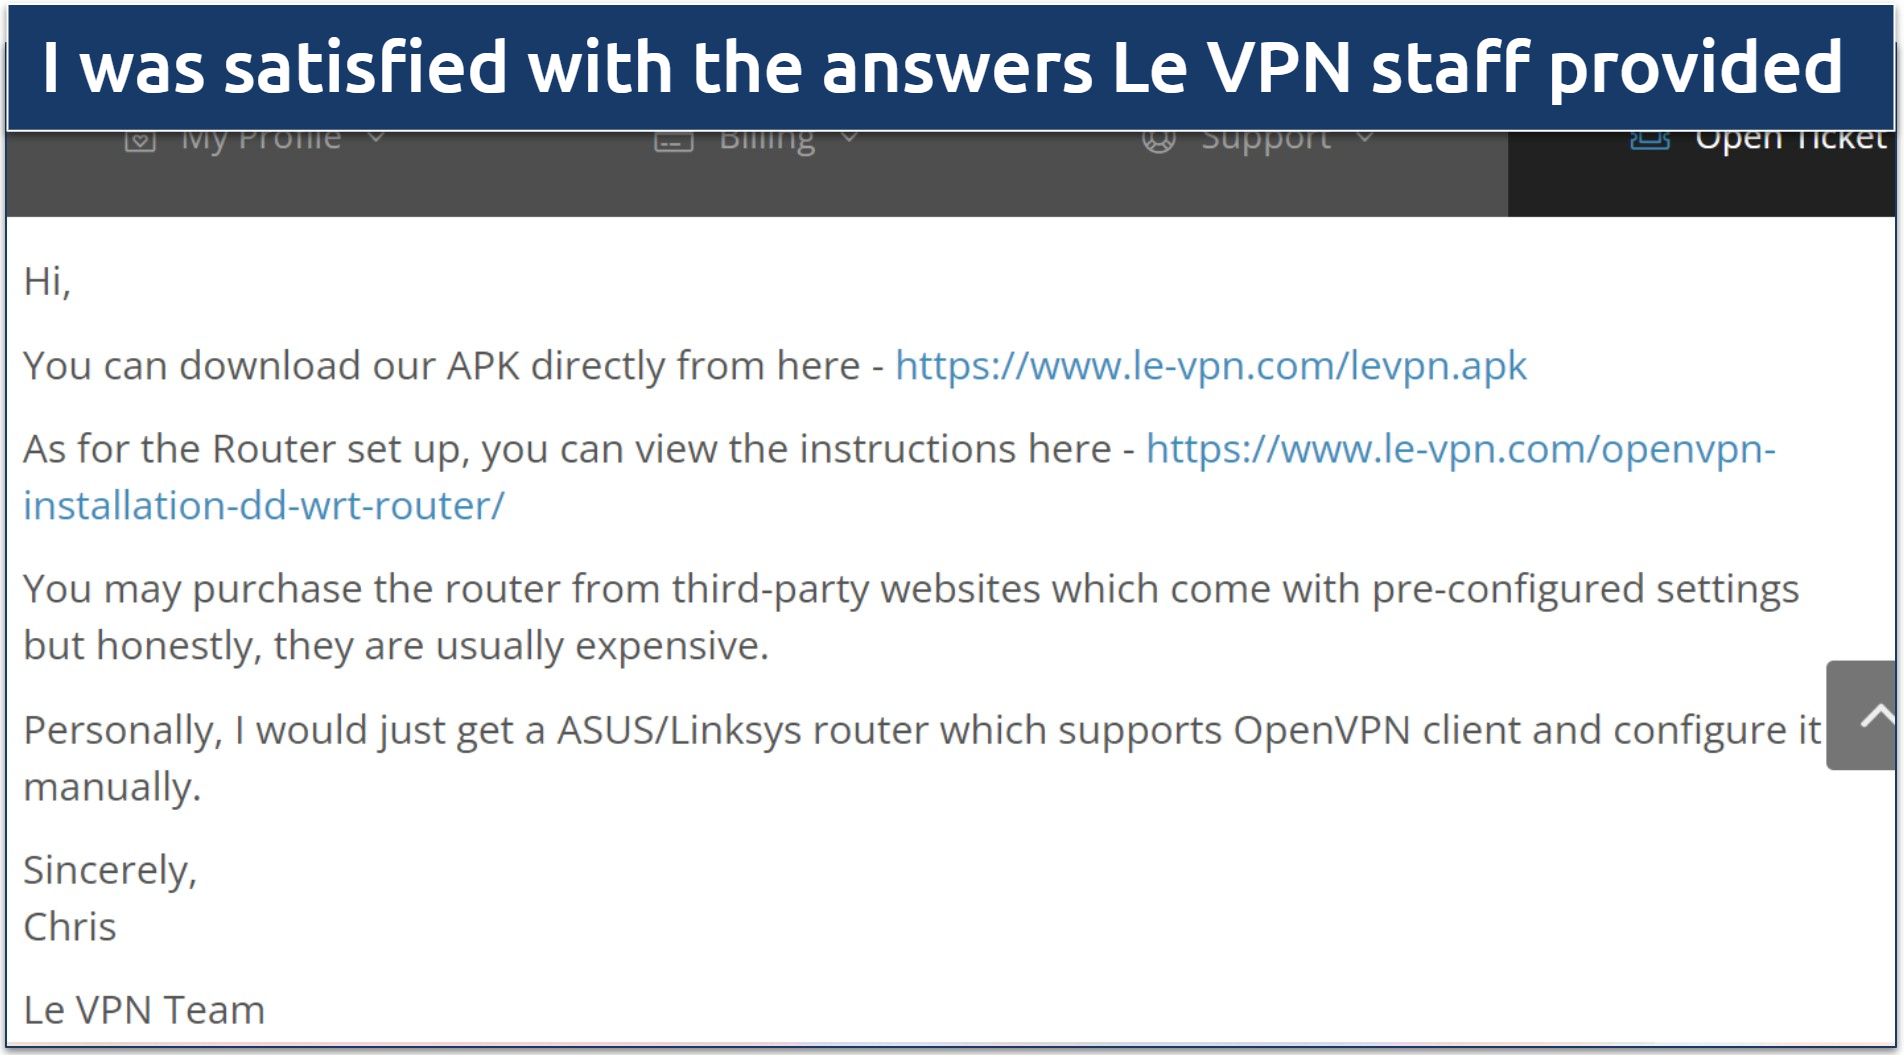 A screenshot showing Le VPN's support team provides detailed and honest answers to inquiries made